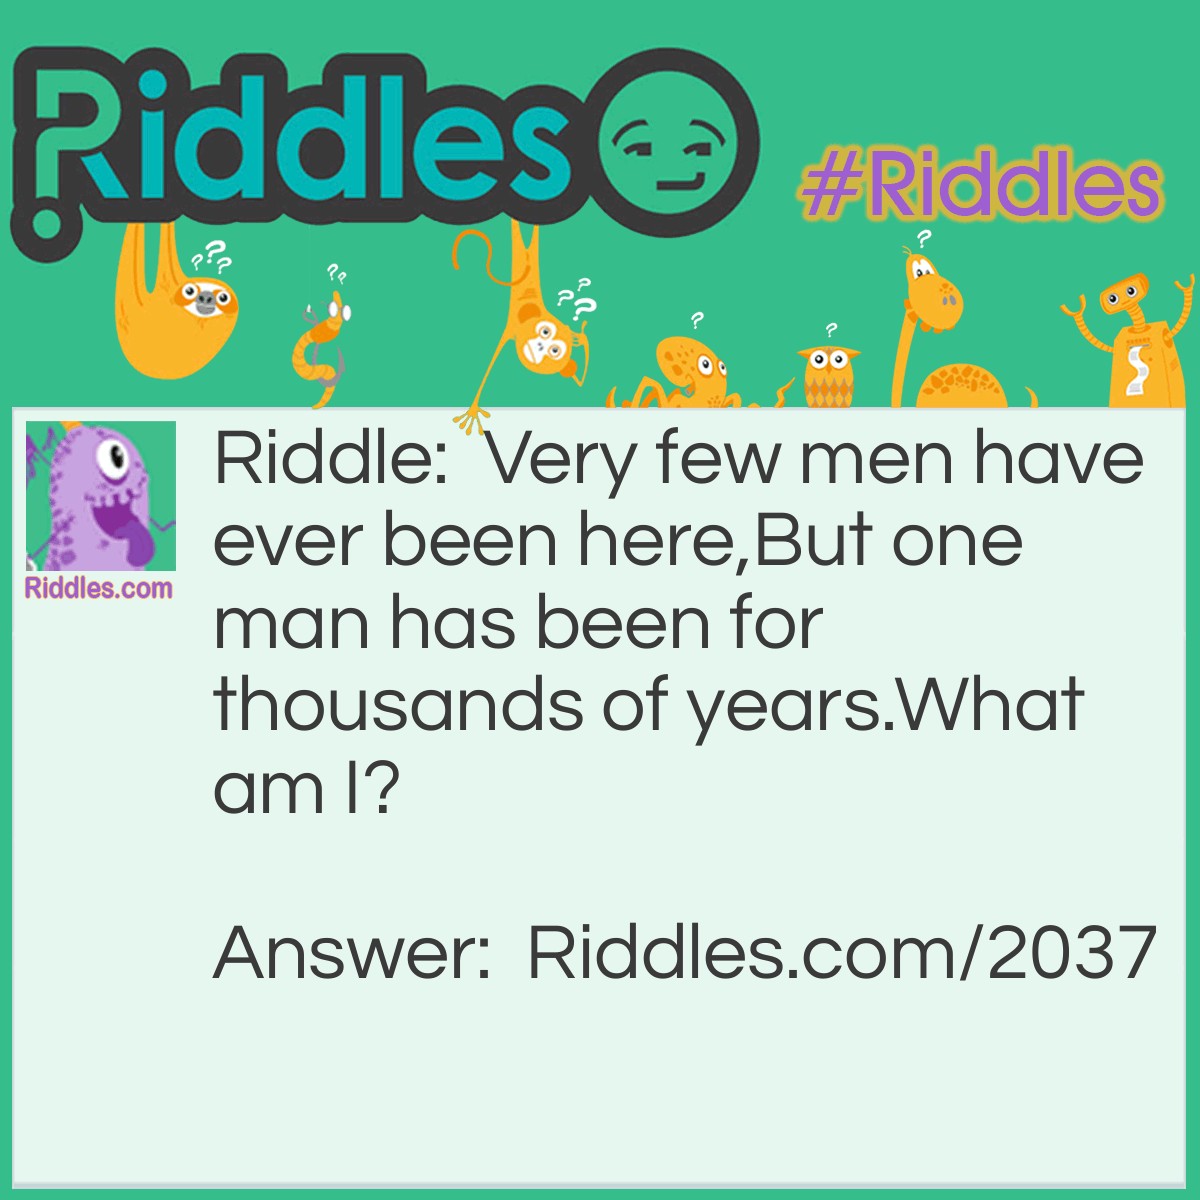 Riddle: Very few men have ever been here,
But one man has been for thousands of years.
What am I? Answer: The moon.